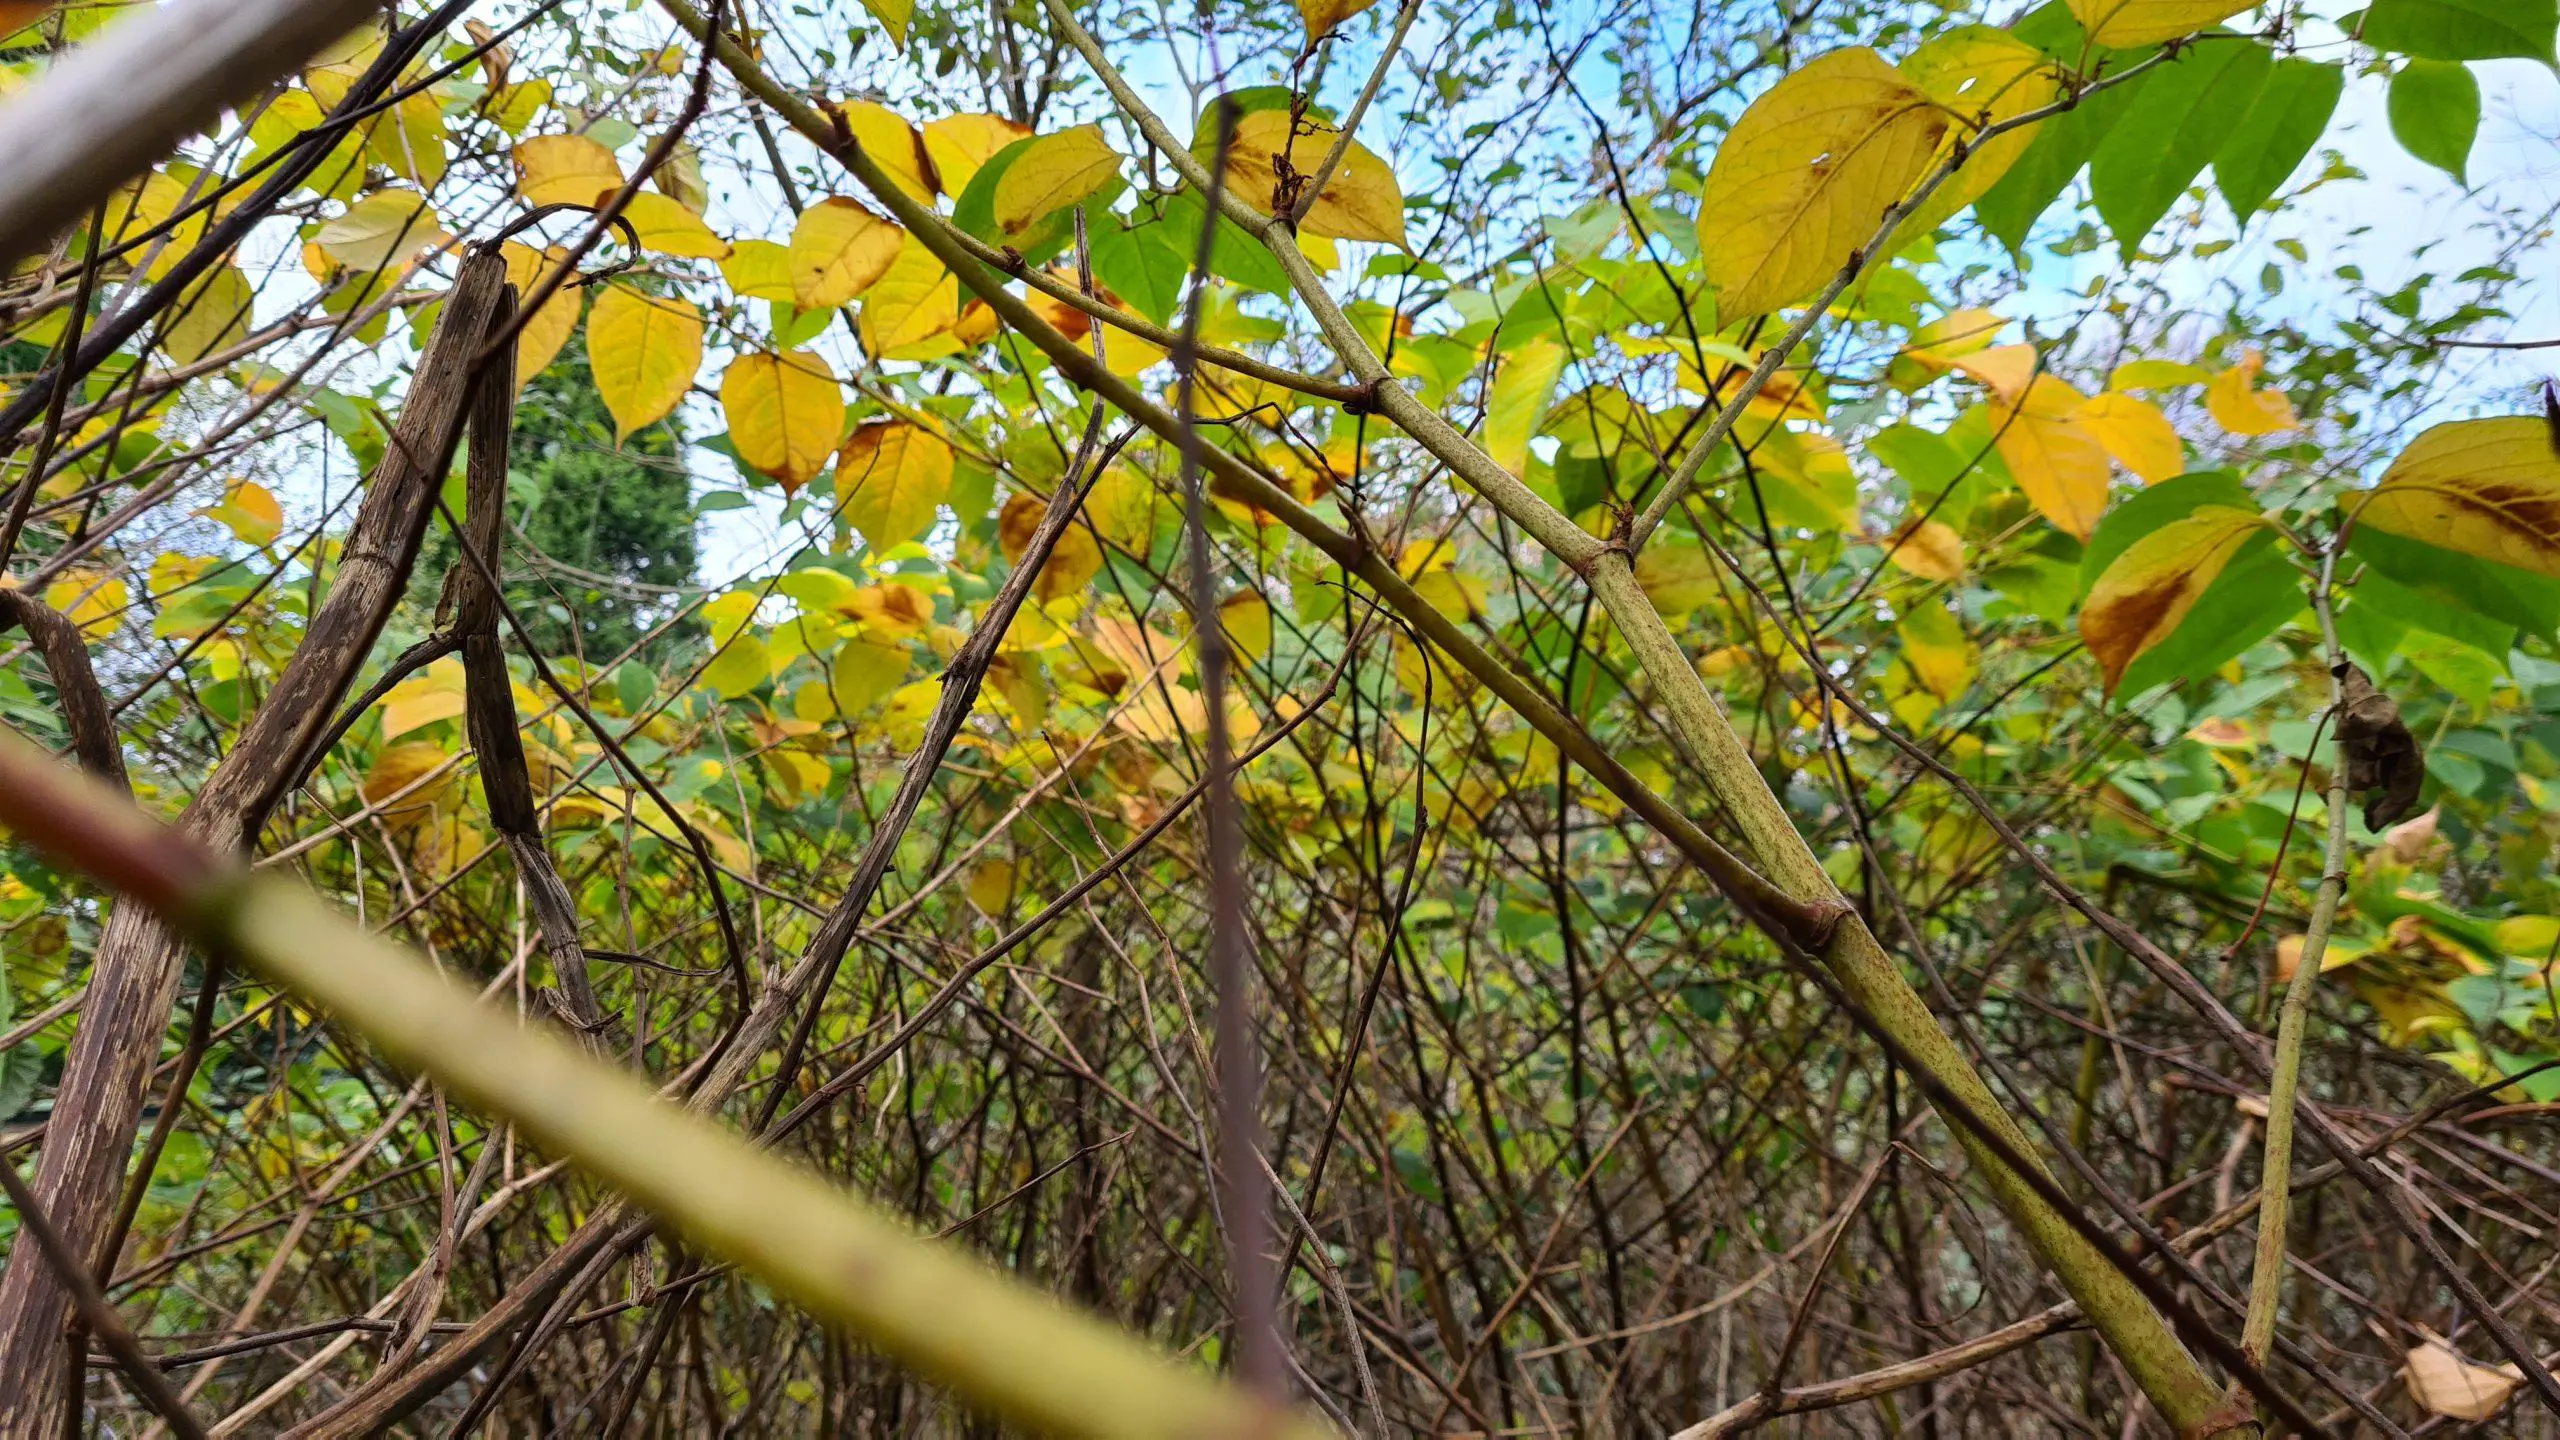 Japanese knotweed grows to such a height that it kills anything else around it including native plants